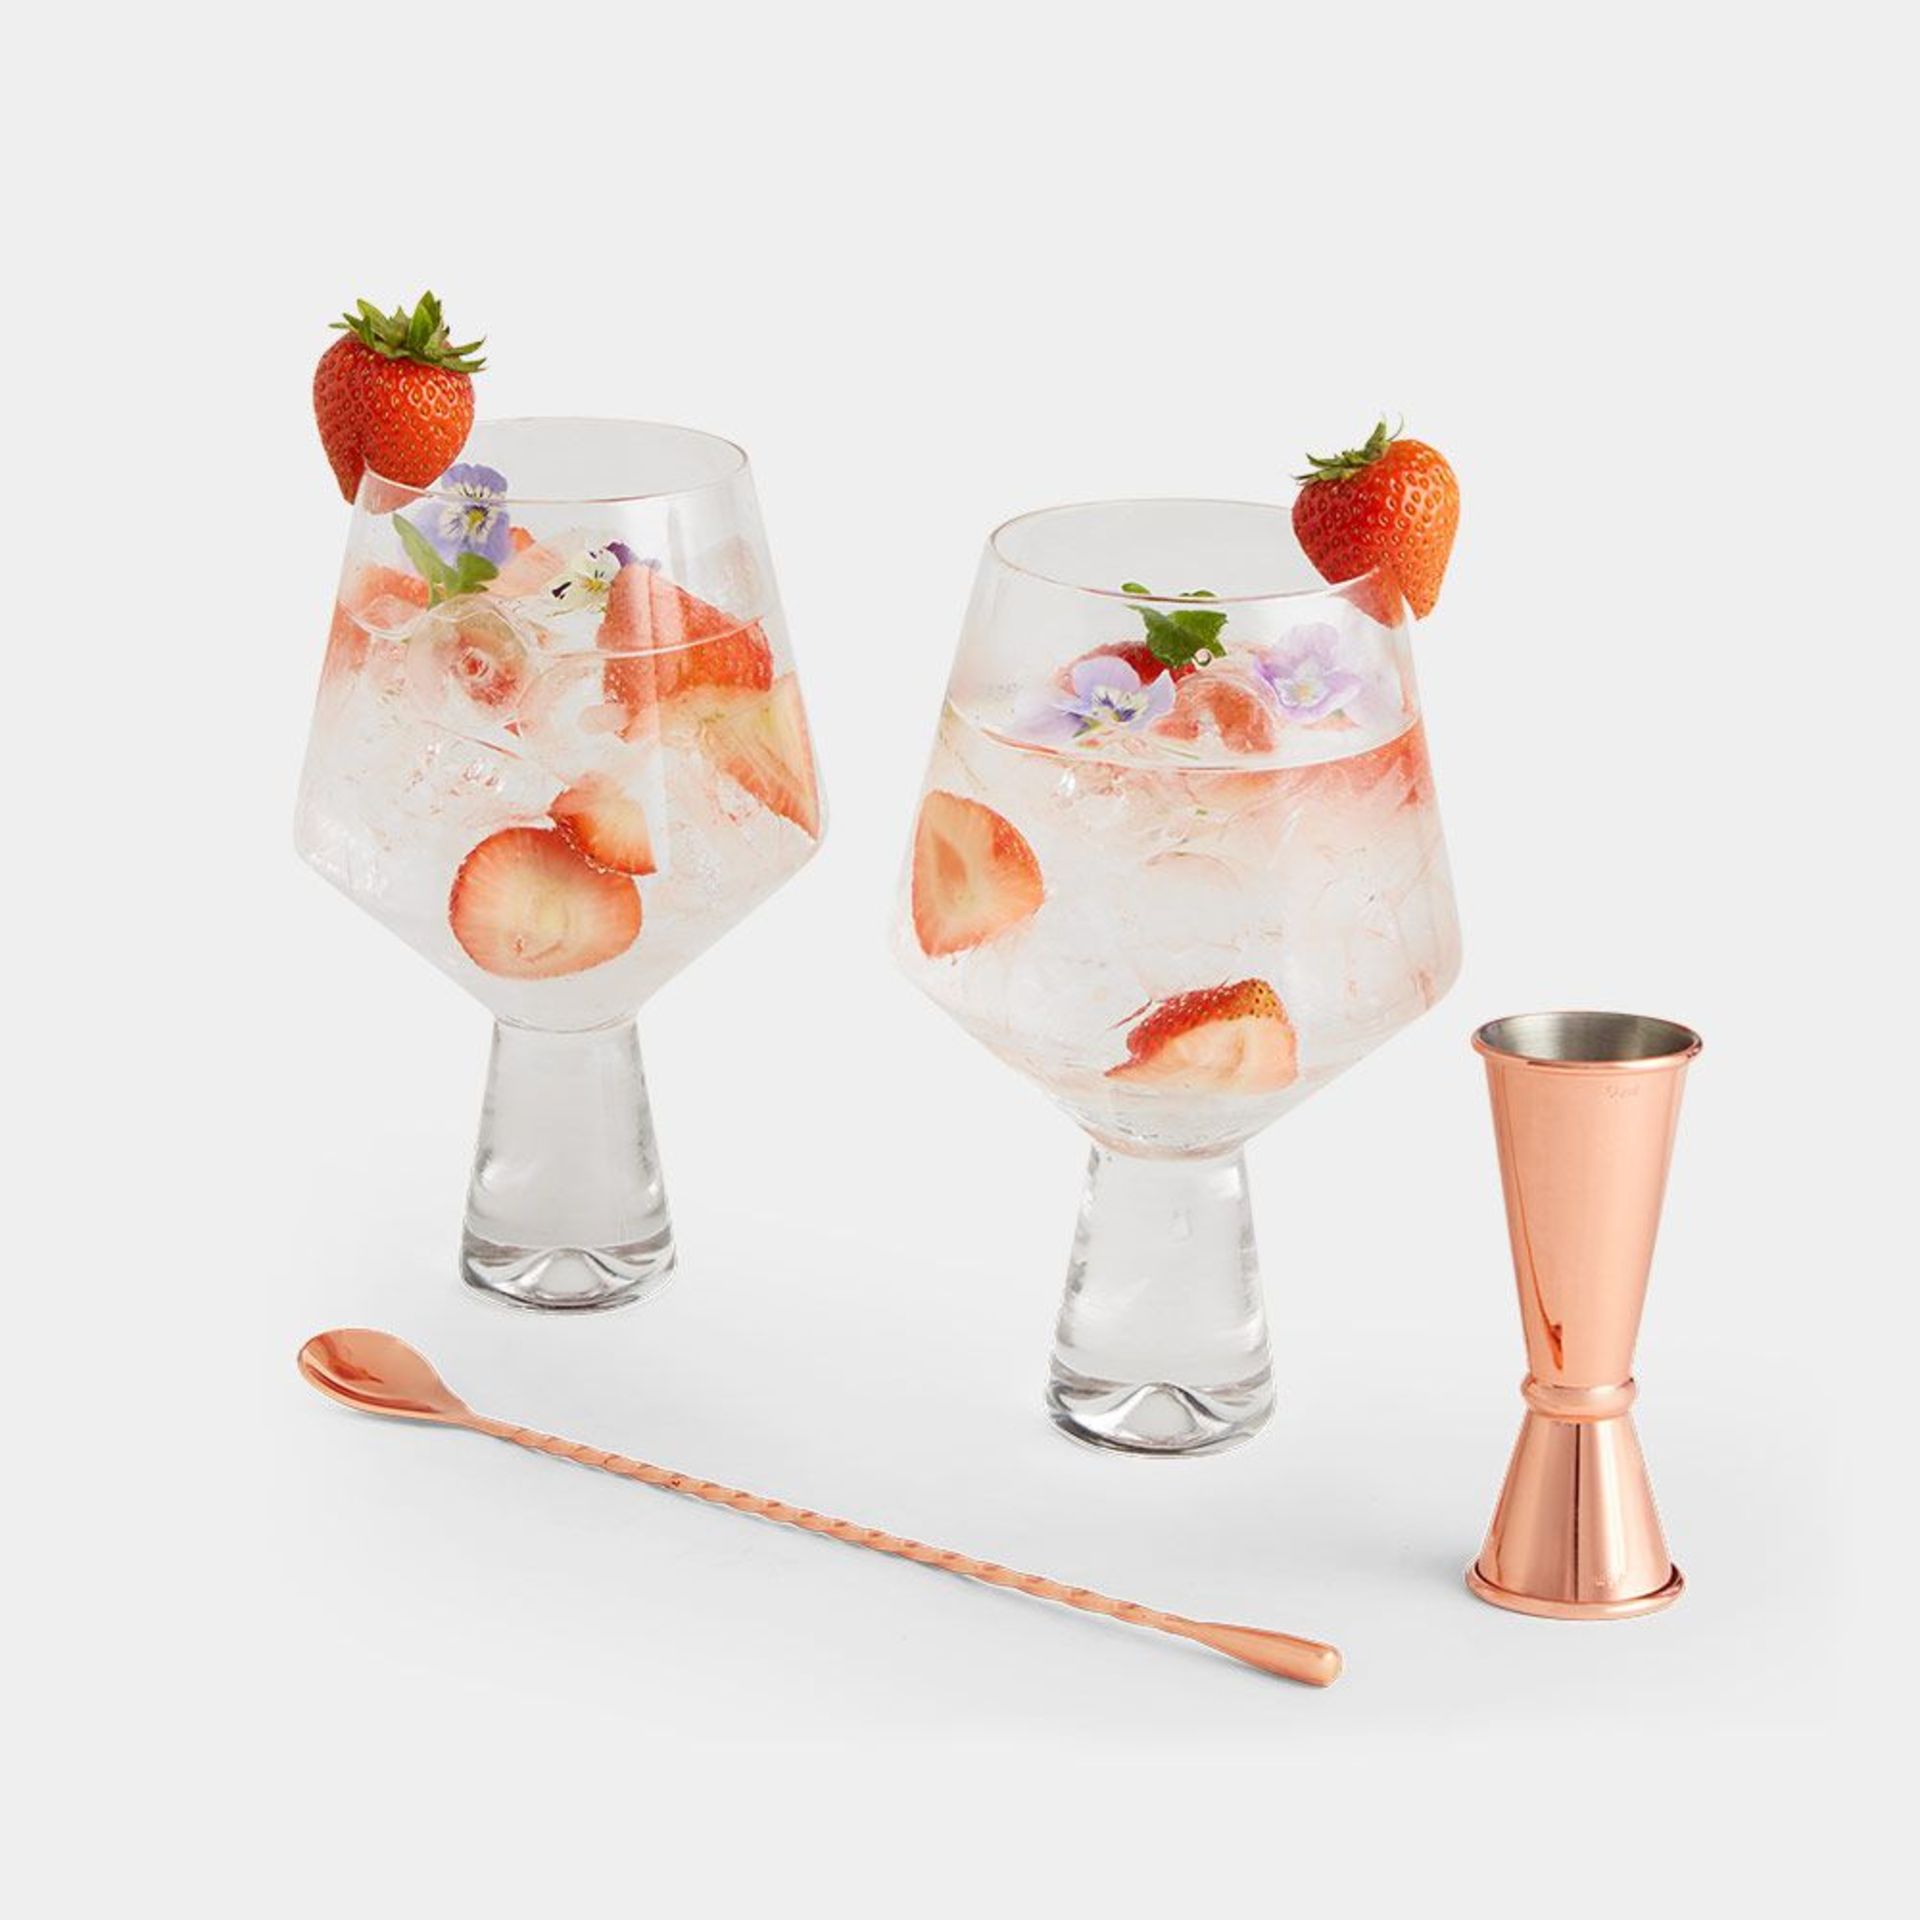 Gin Glasses Gift Set. With an impressive 685ml capacity, the set of 2 glasses have an on-trend and